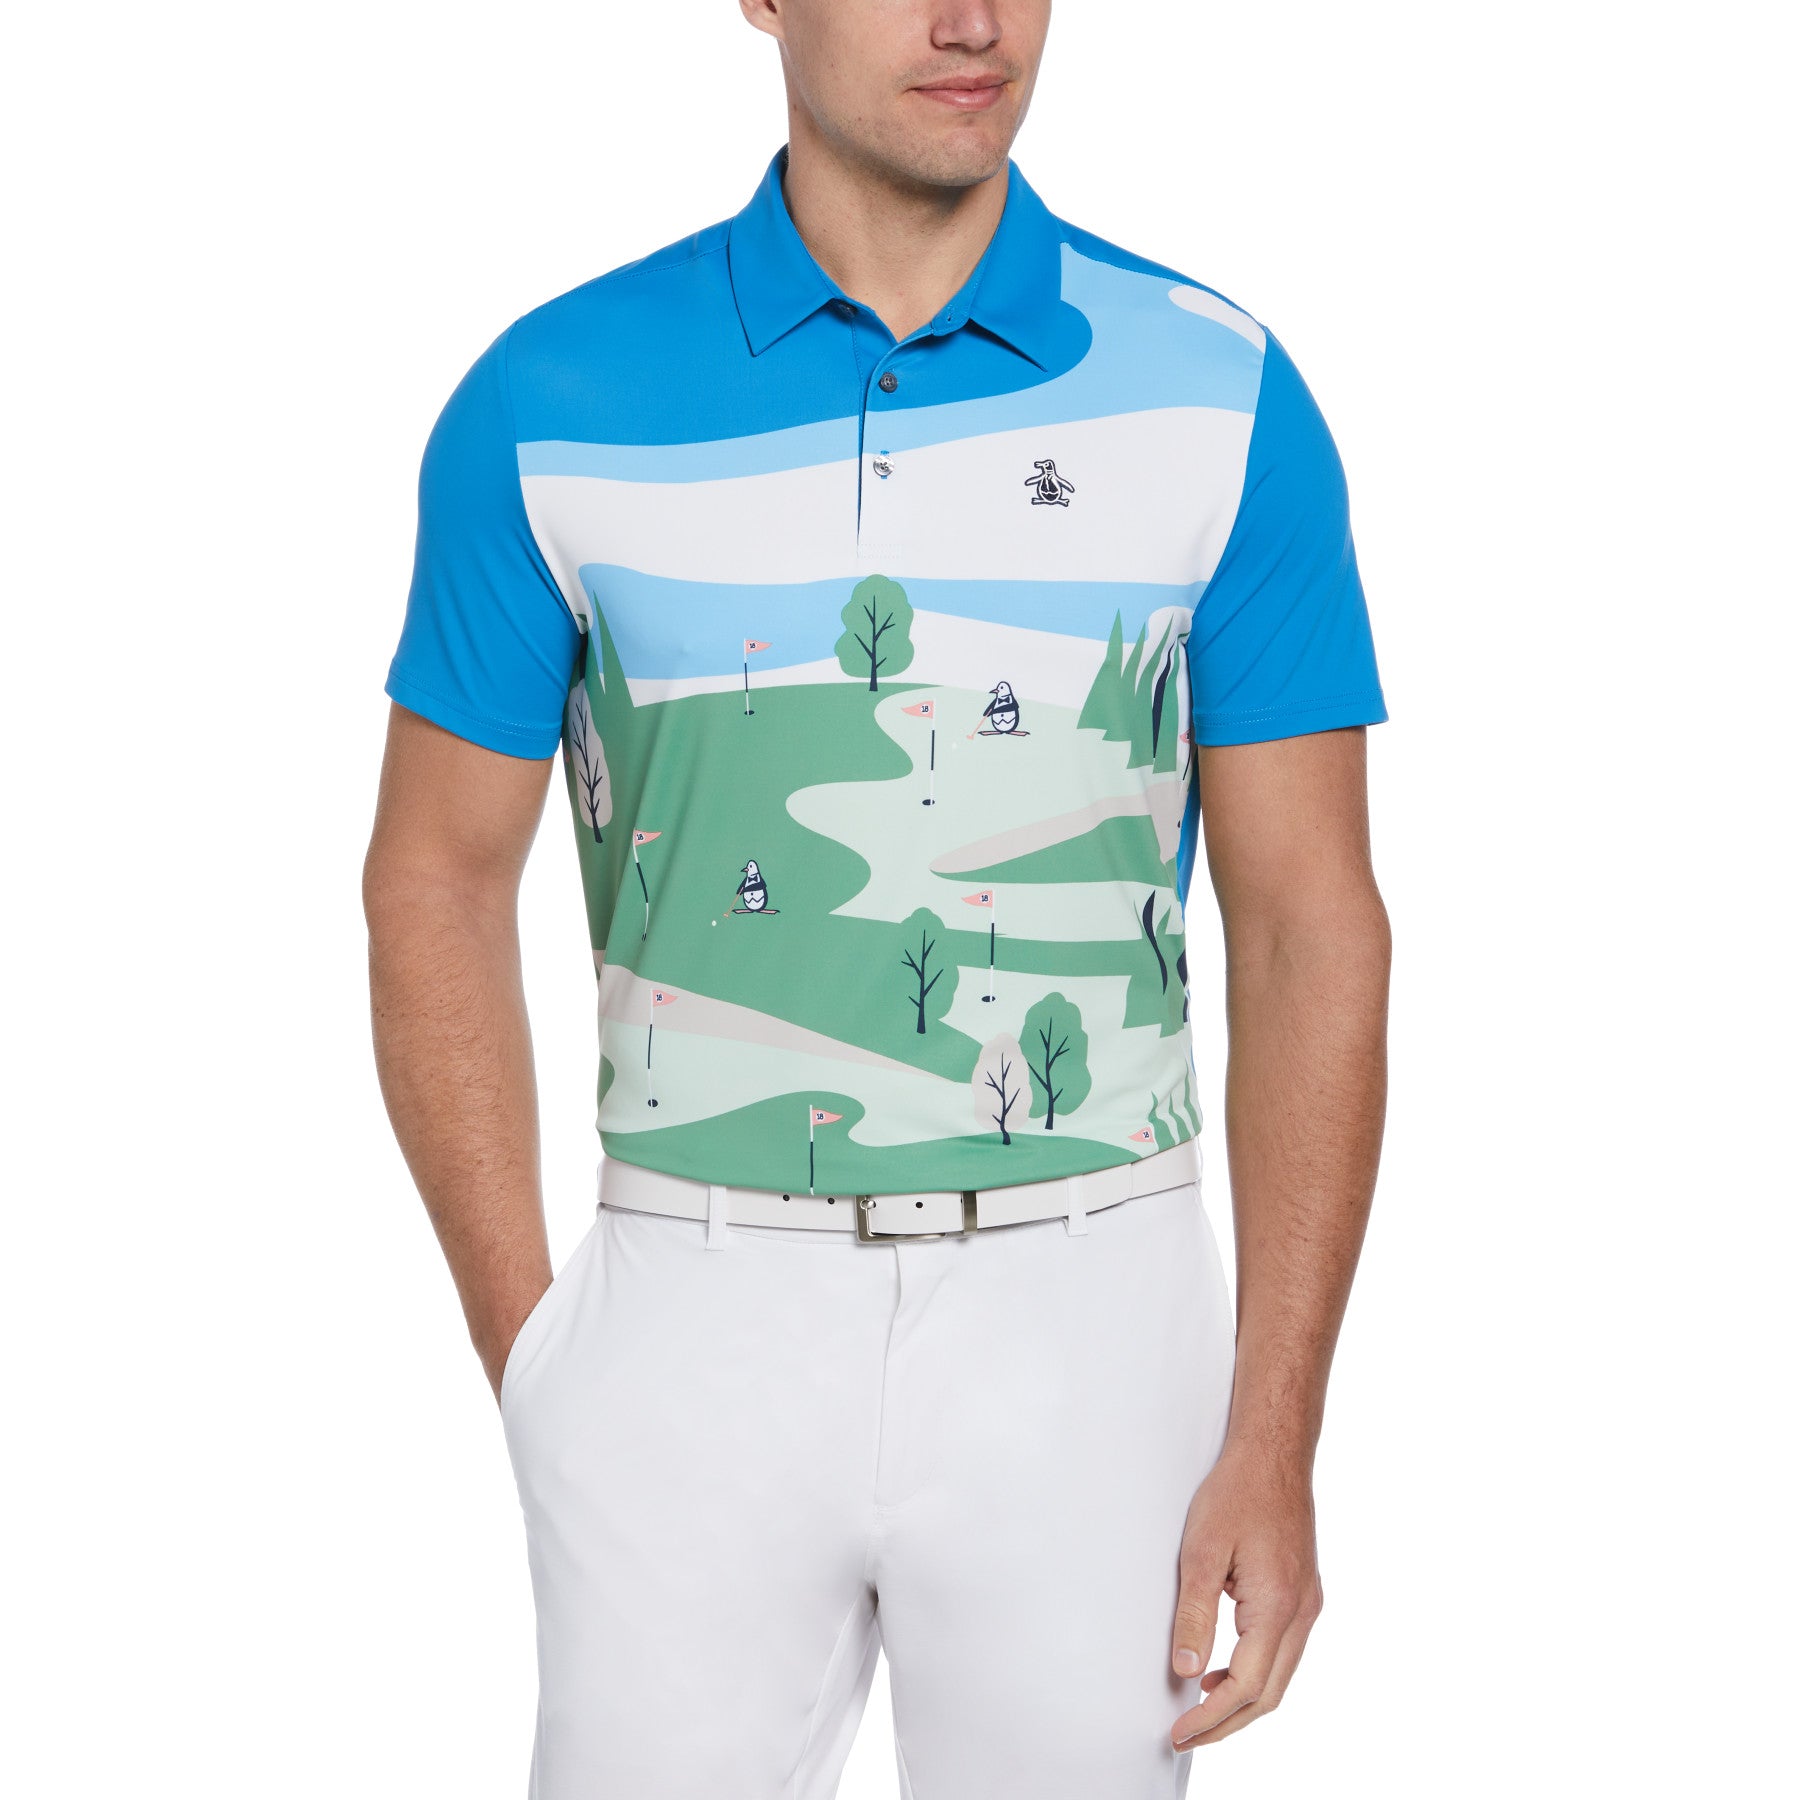 View Pete On The Course Print Short Sleeve Golf Polo Shirt In Mediterranean information